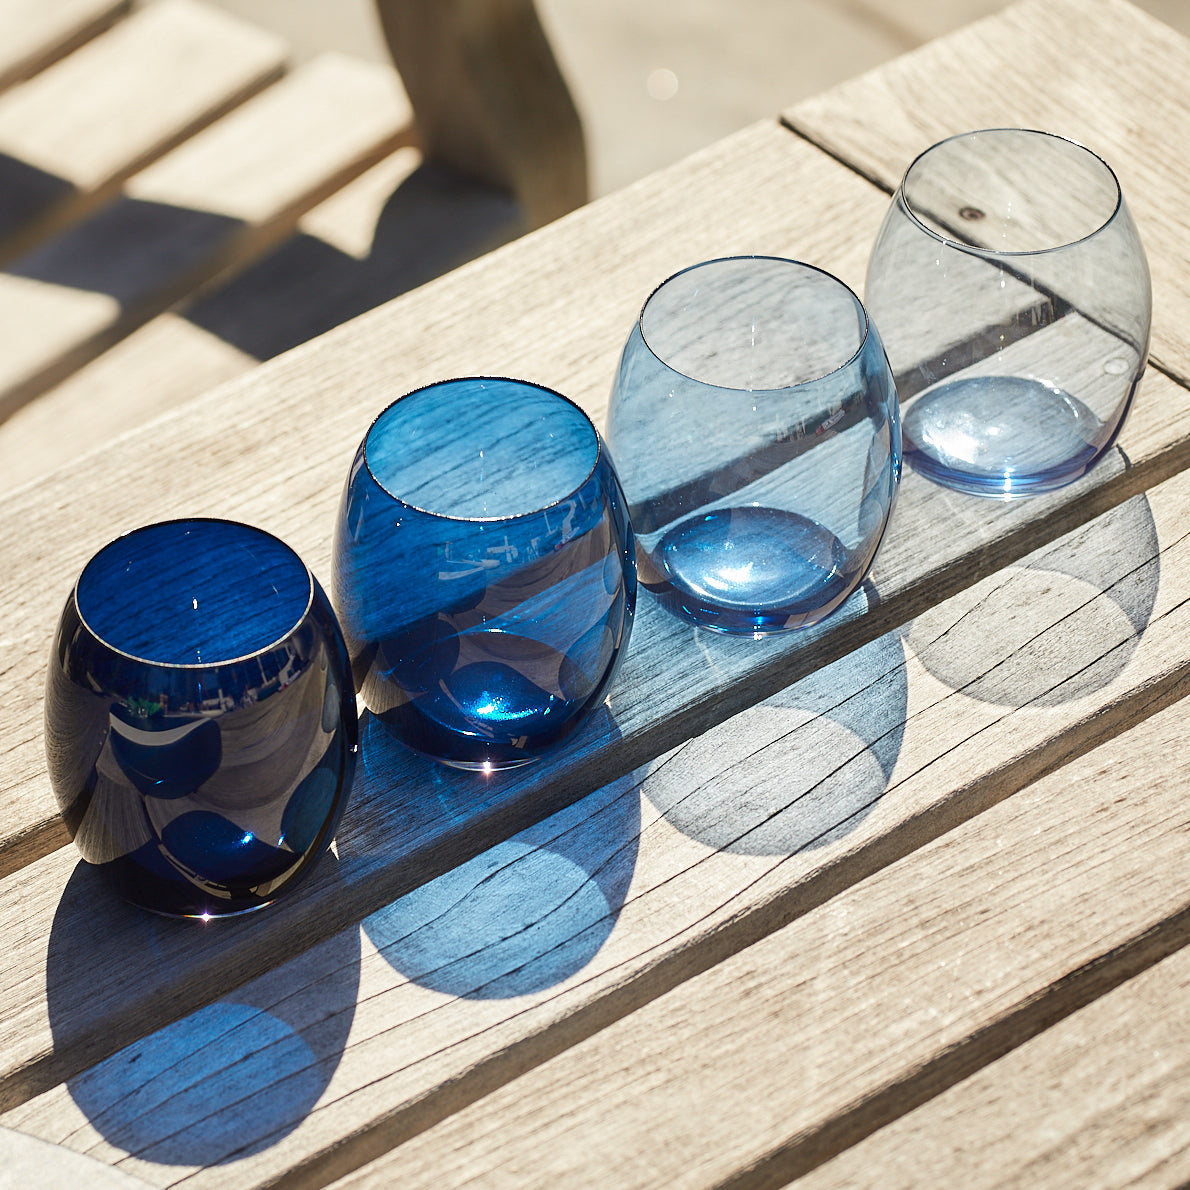 Three Les Nuages Blue Ombré Glasses Set of 4 on a wooden table.